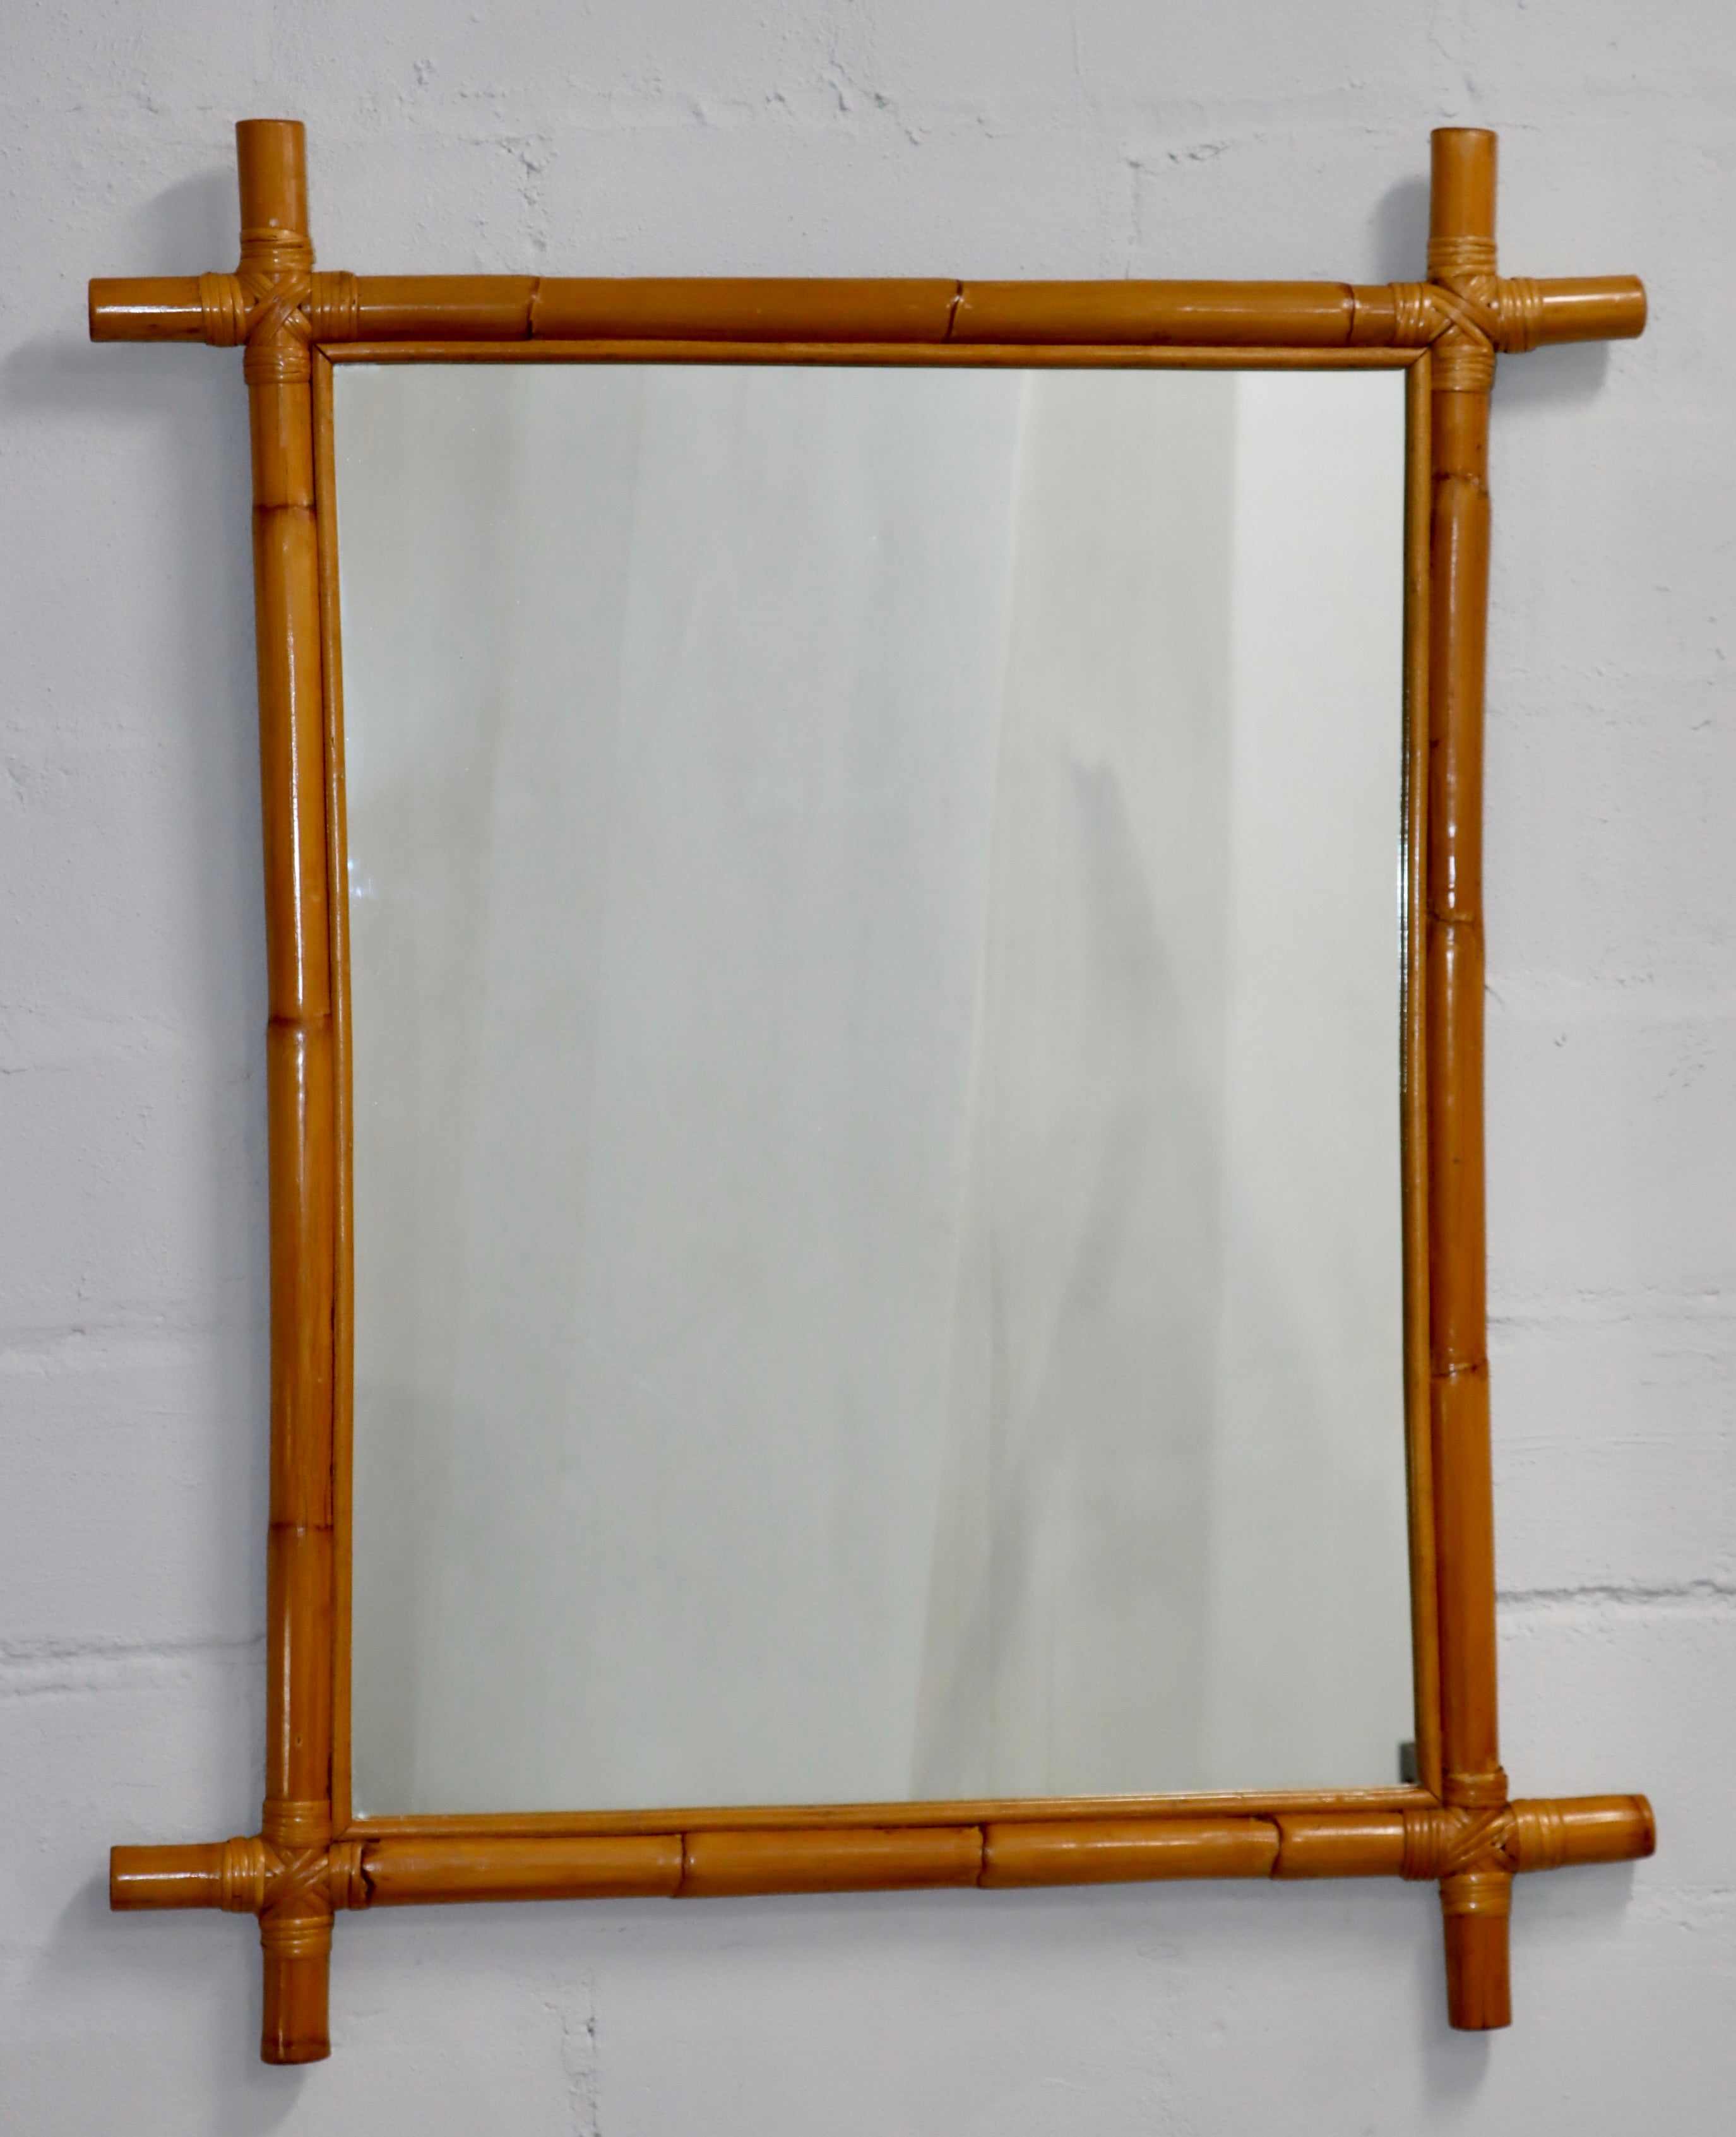 1960's mid-century modern large bamboo and rattan wall mirror, in vintage original condition with minor wear and patina due to age and use.